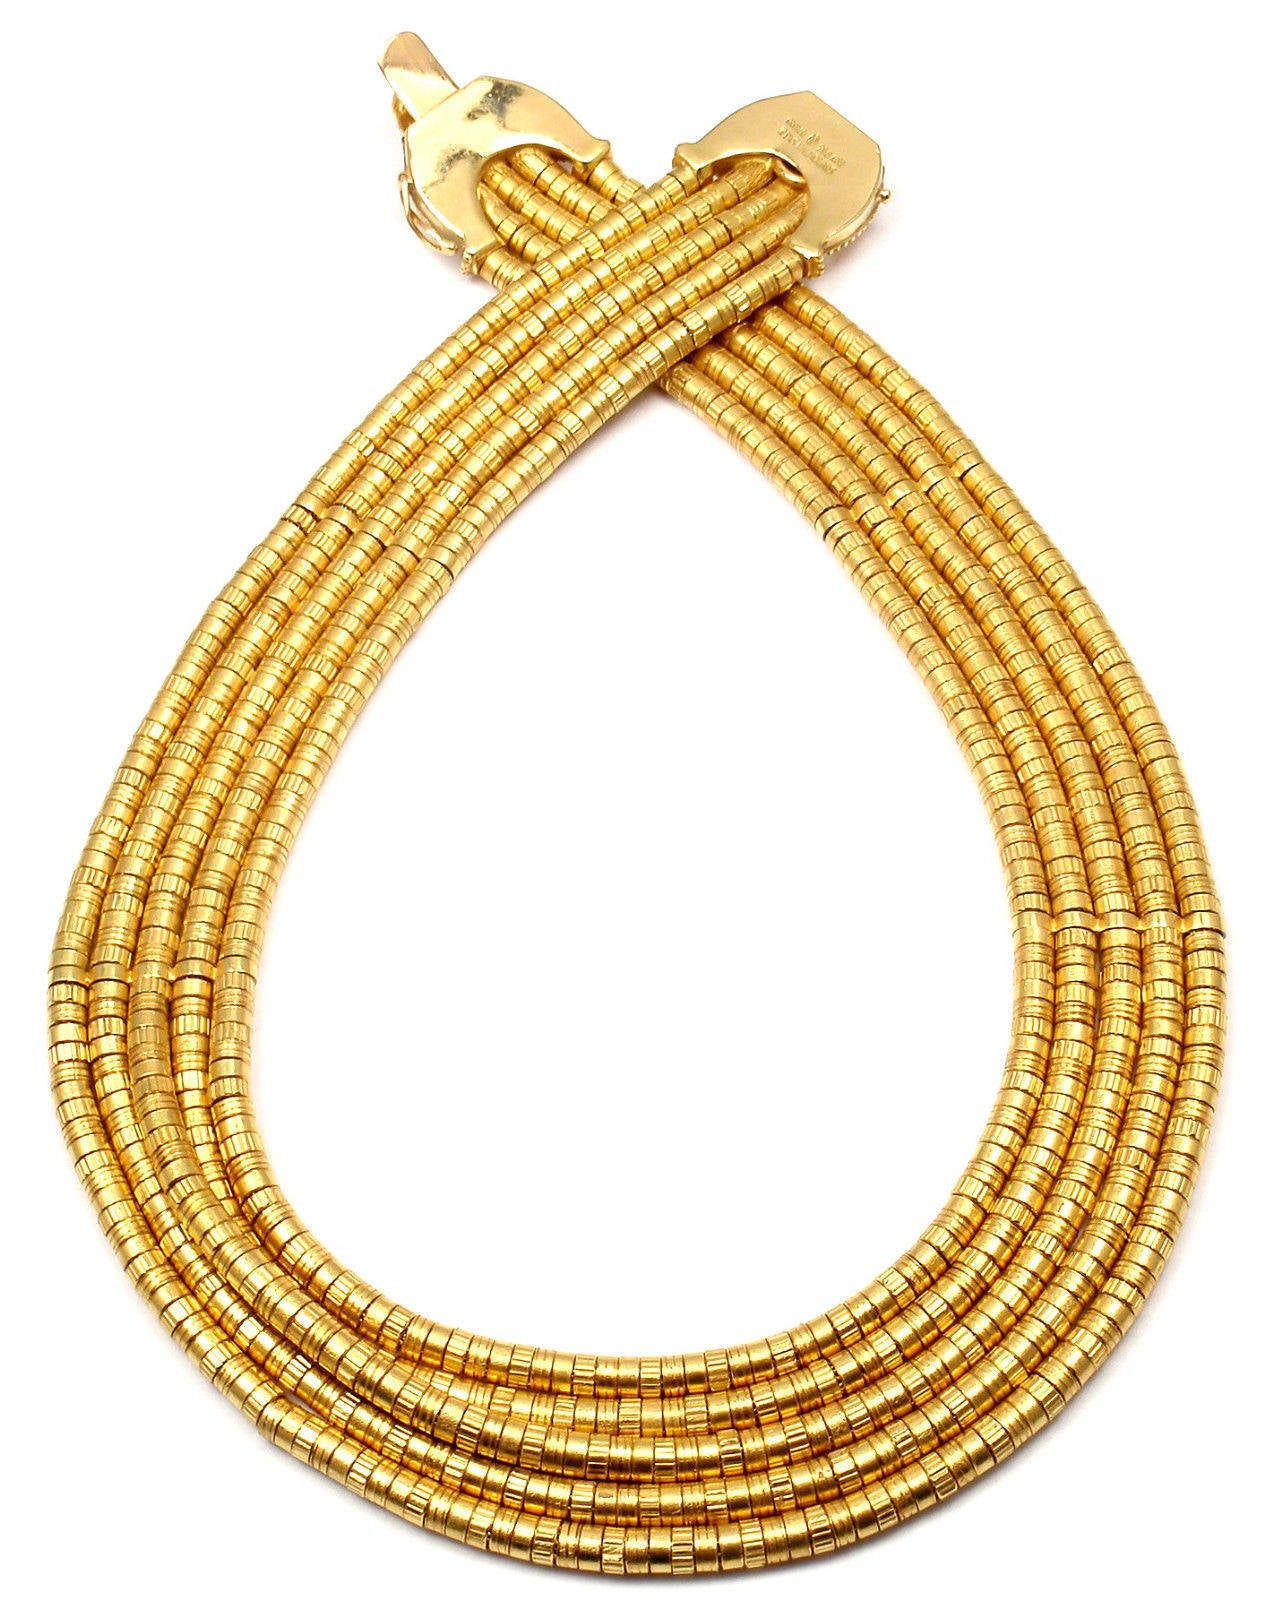 Women's Ilias Lalaounis Helen of Troy 5 Row Bead Yellow Gold Necklace